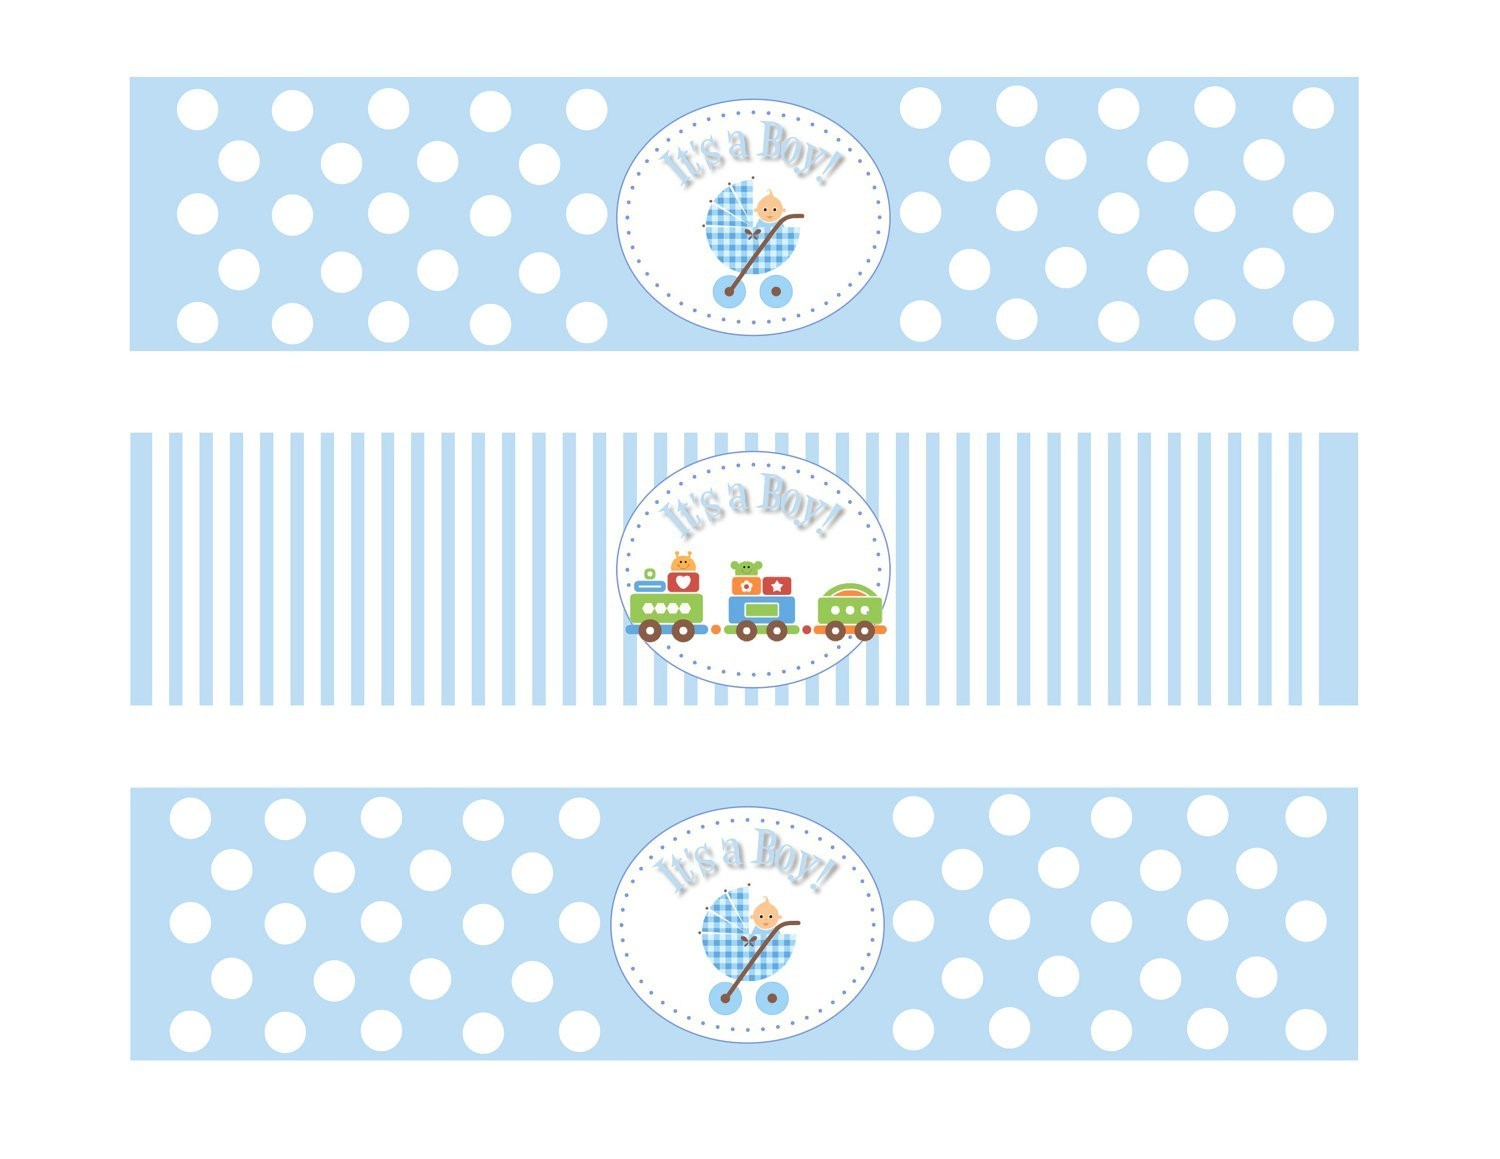 Free Printable Water Bottle Labels For Baby Shower Image Random - Free Printable Water Bottle Labels For Baby Shower